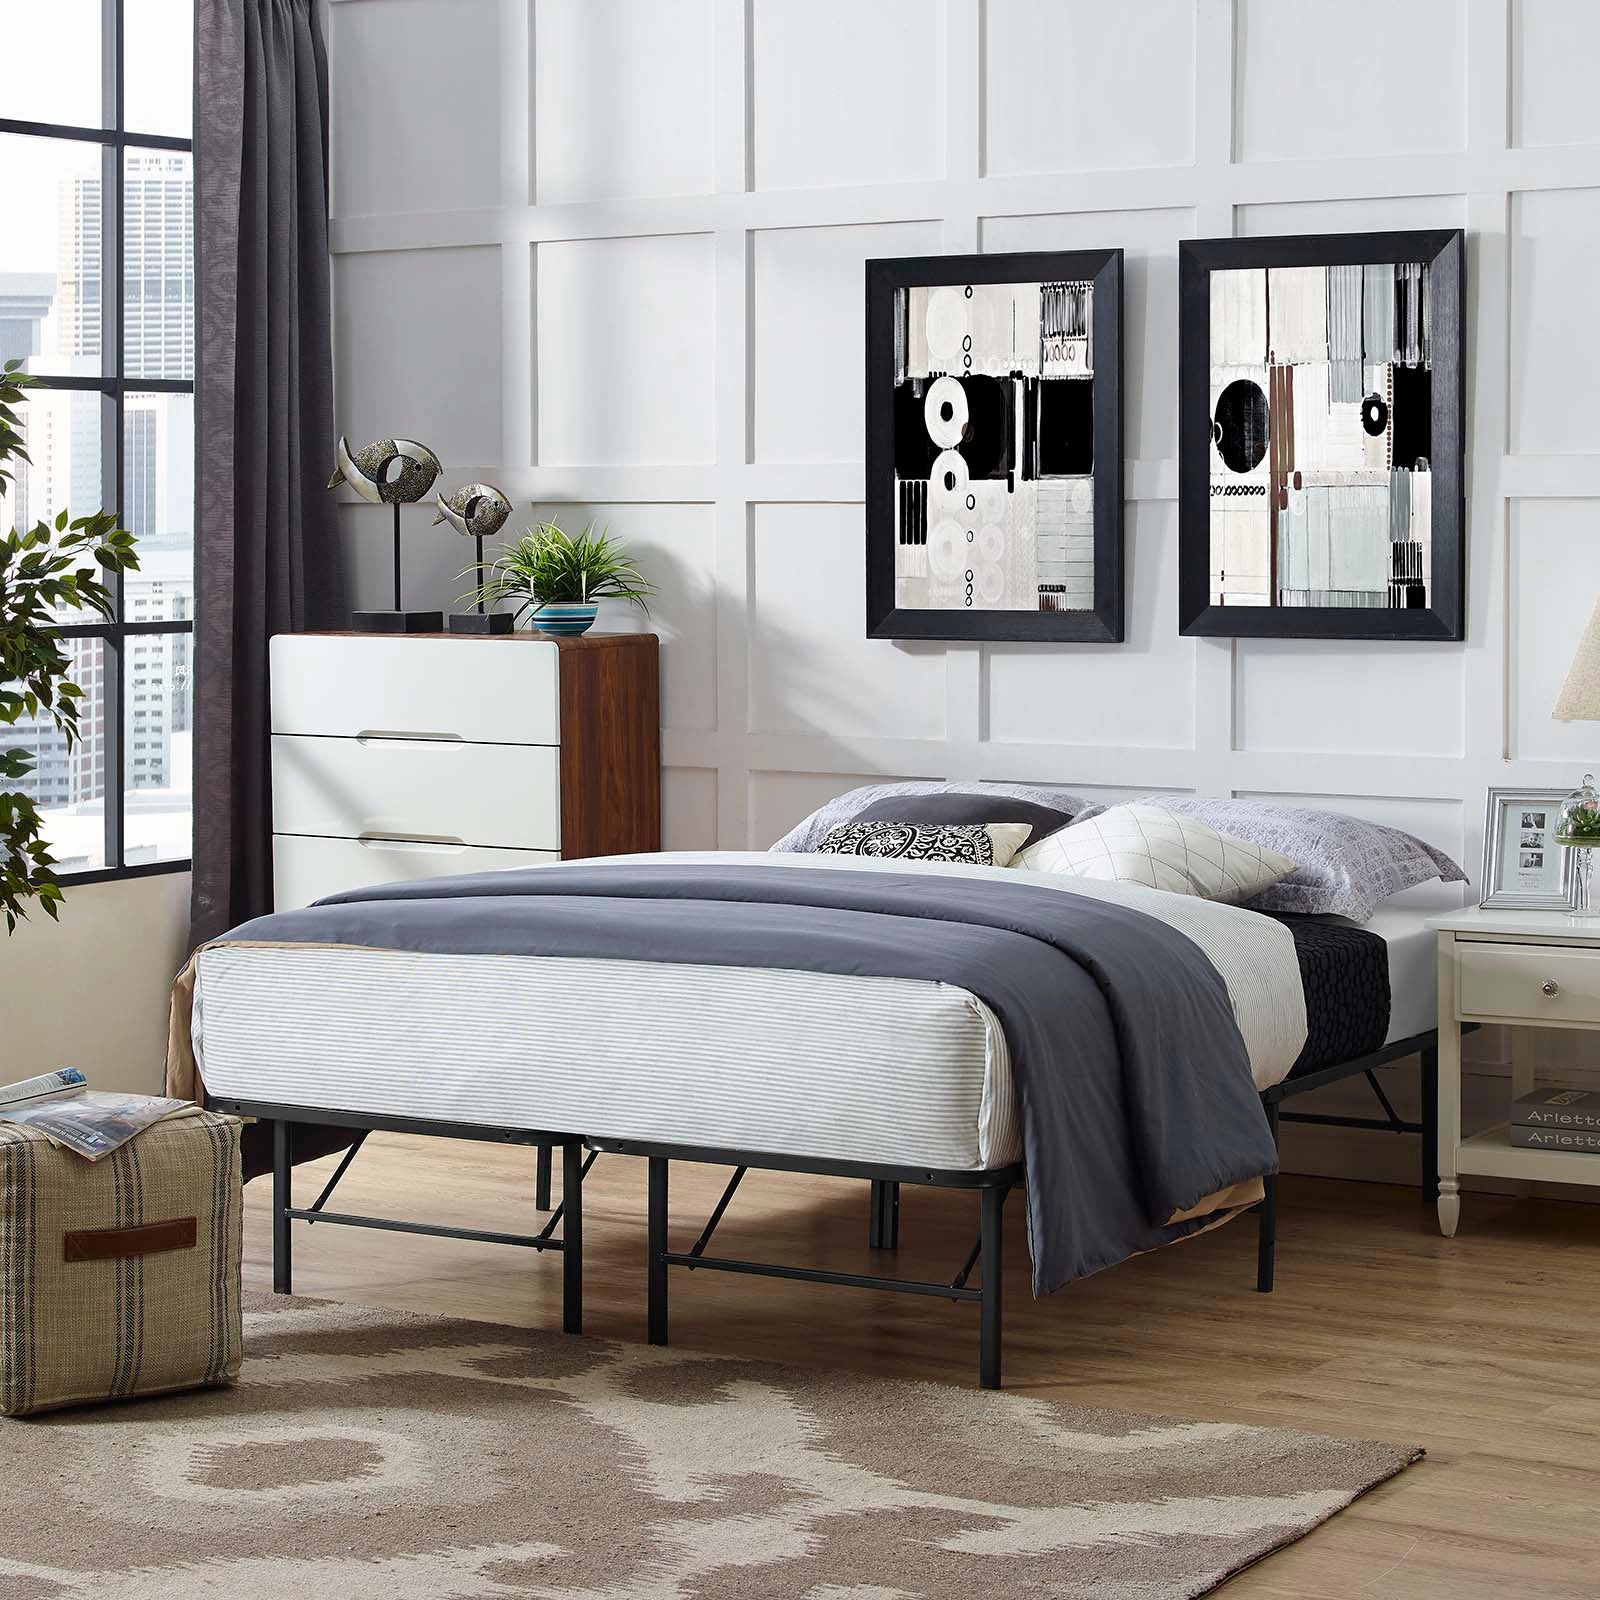 Modway Beds - Horizon Queen Stainless Steel Bed Frame Brown